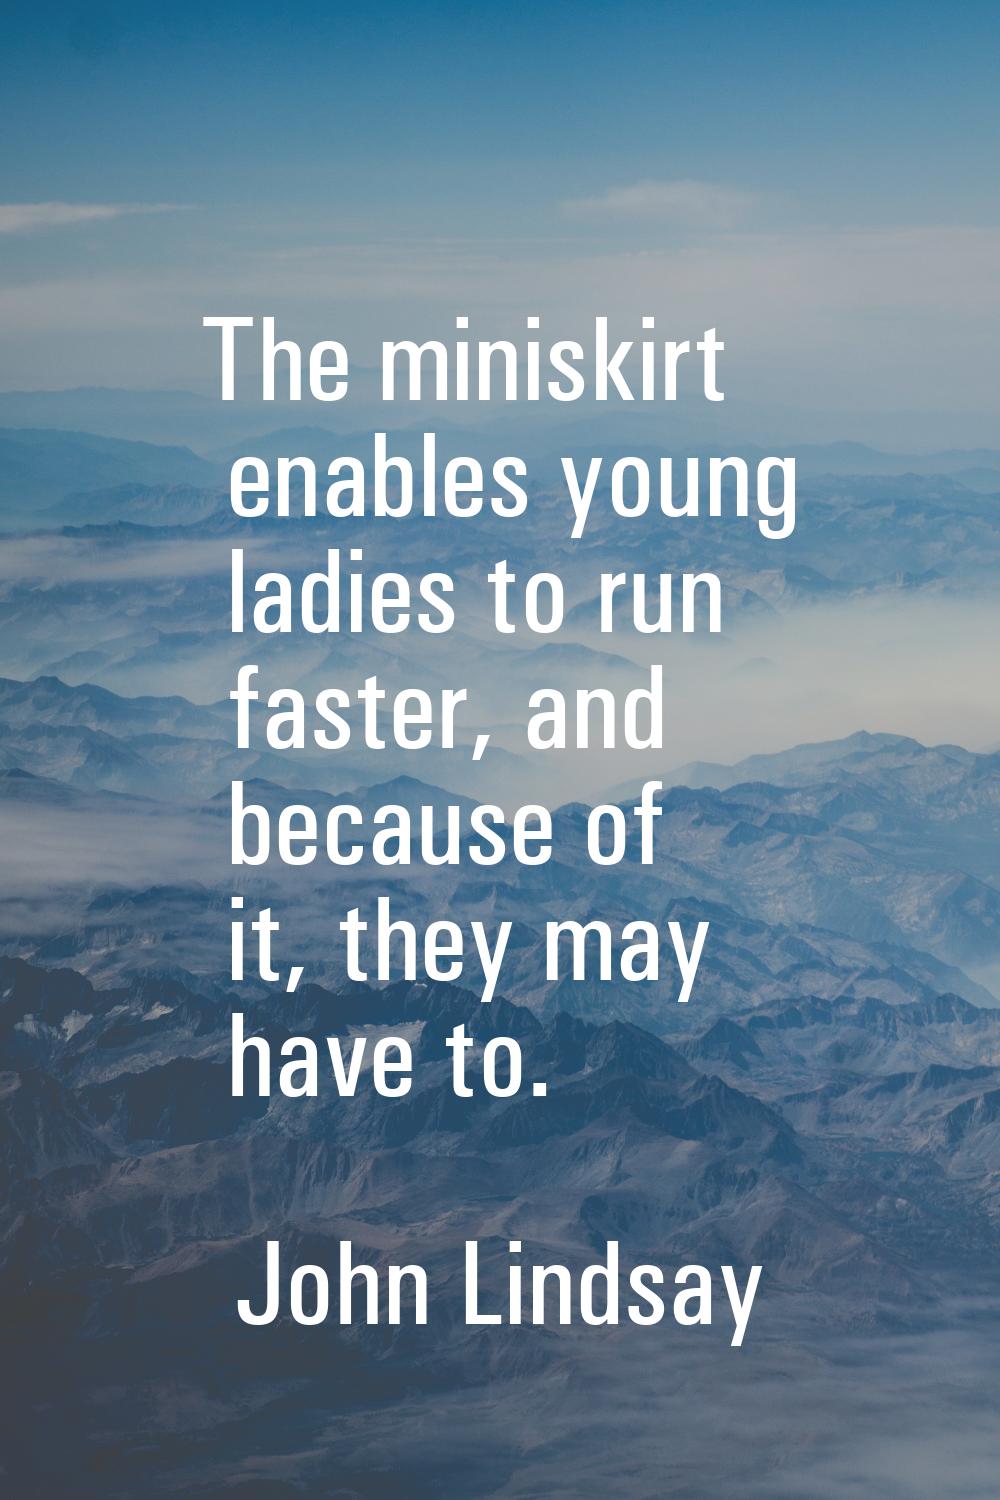 The miniskirt enables young ladies to run faster, and because of it, they may have to.